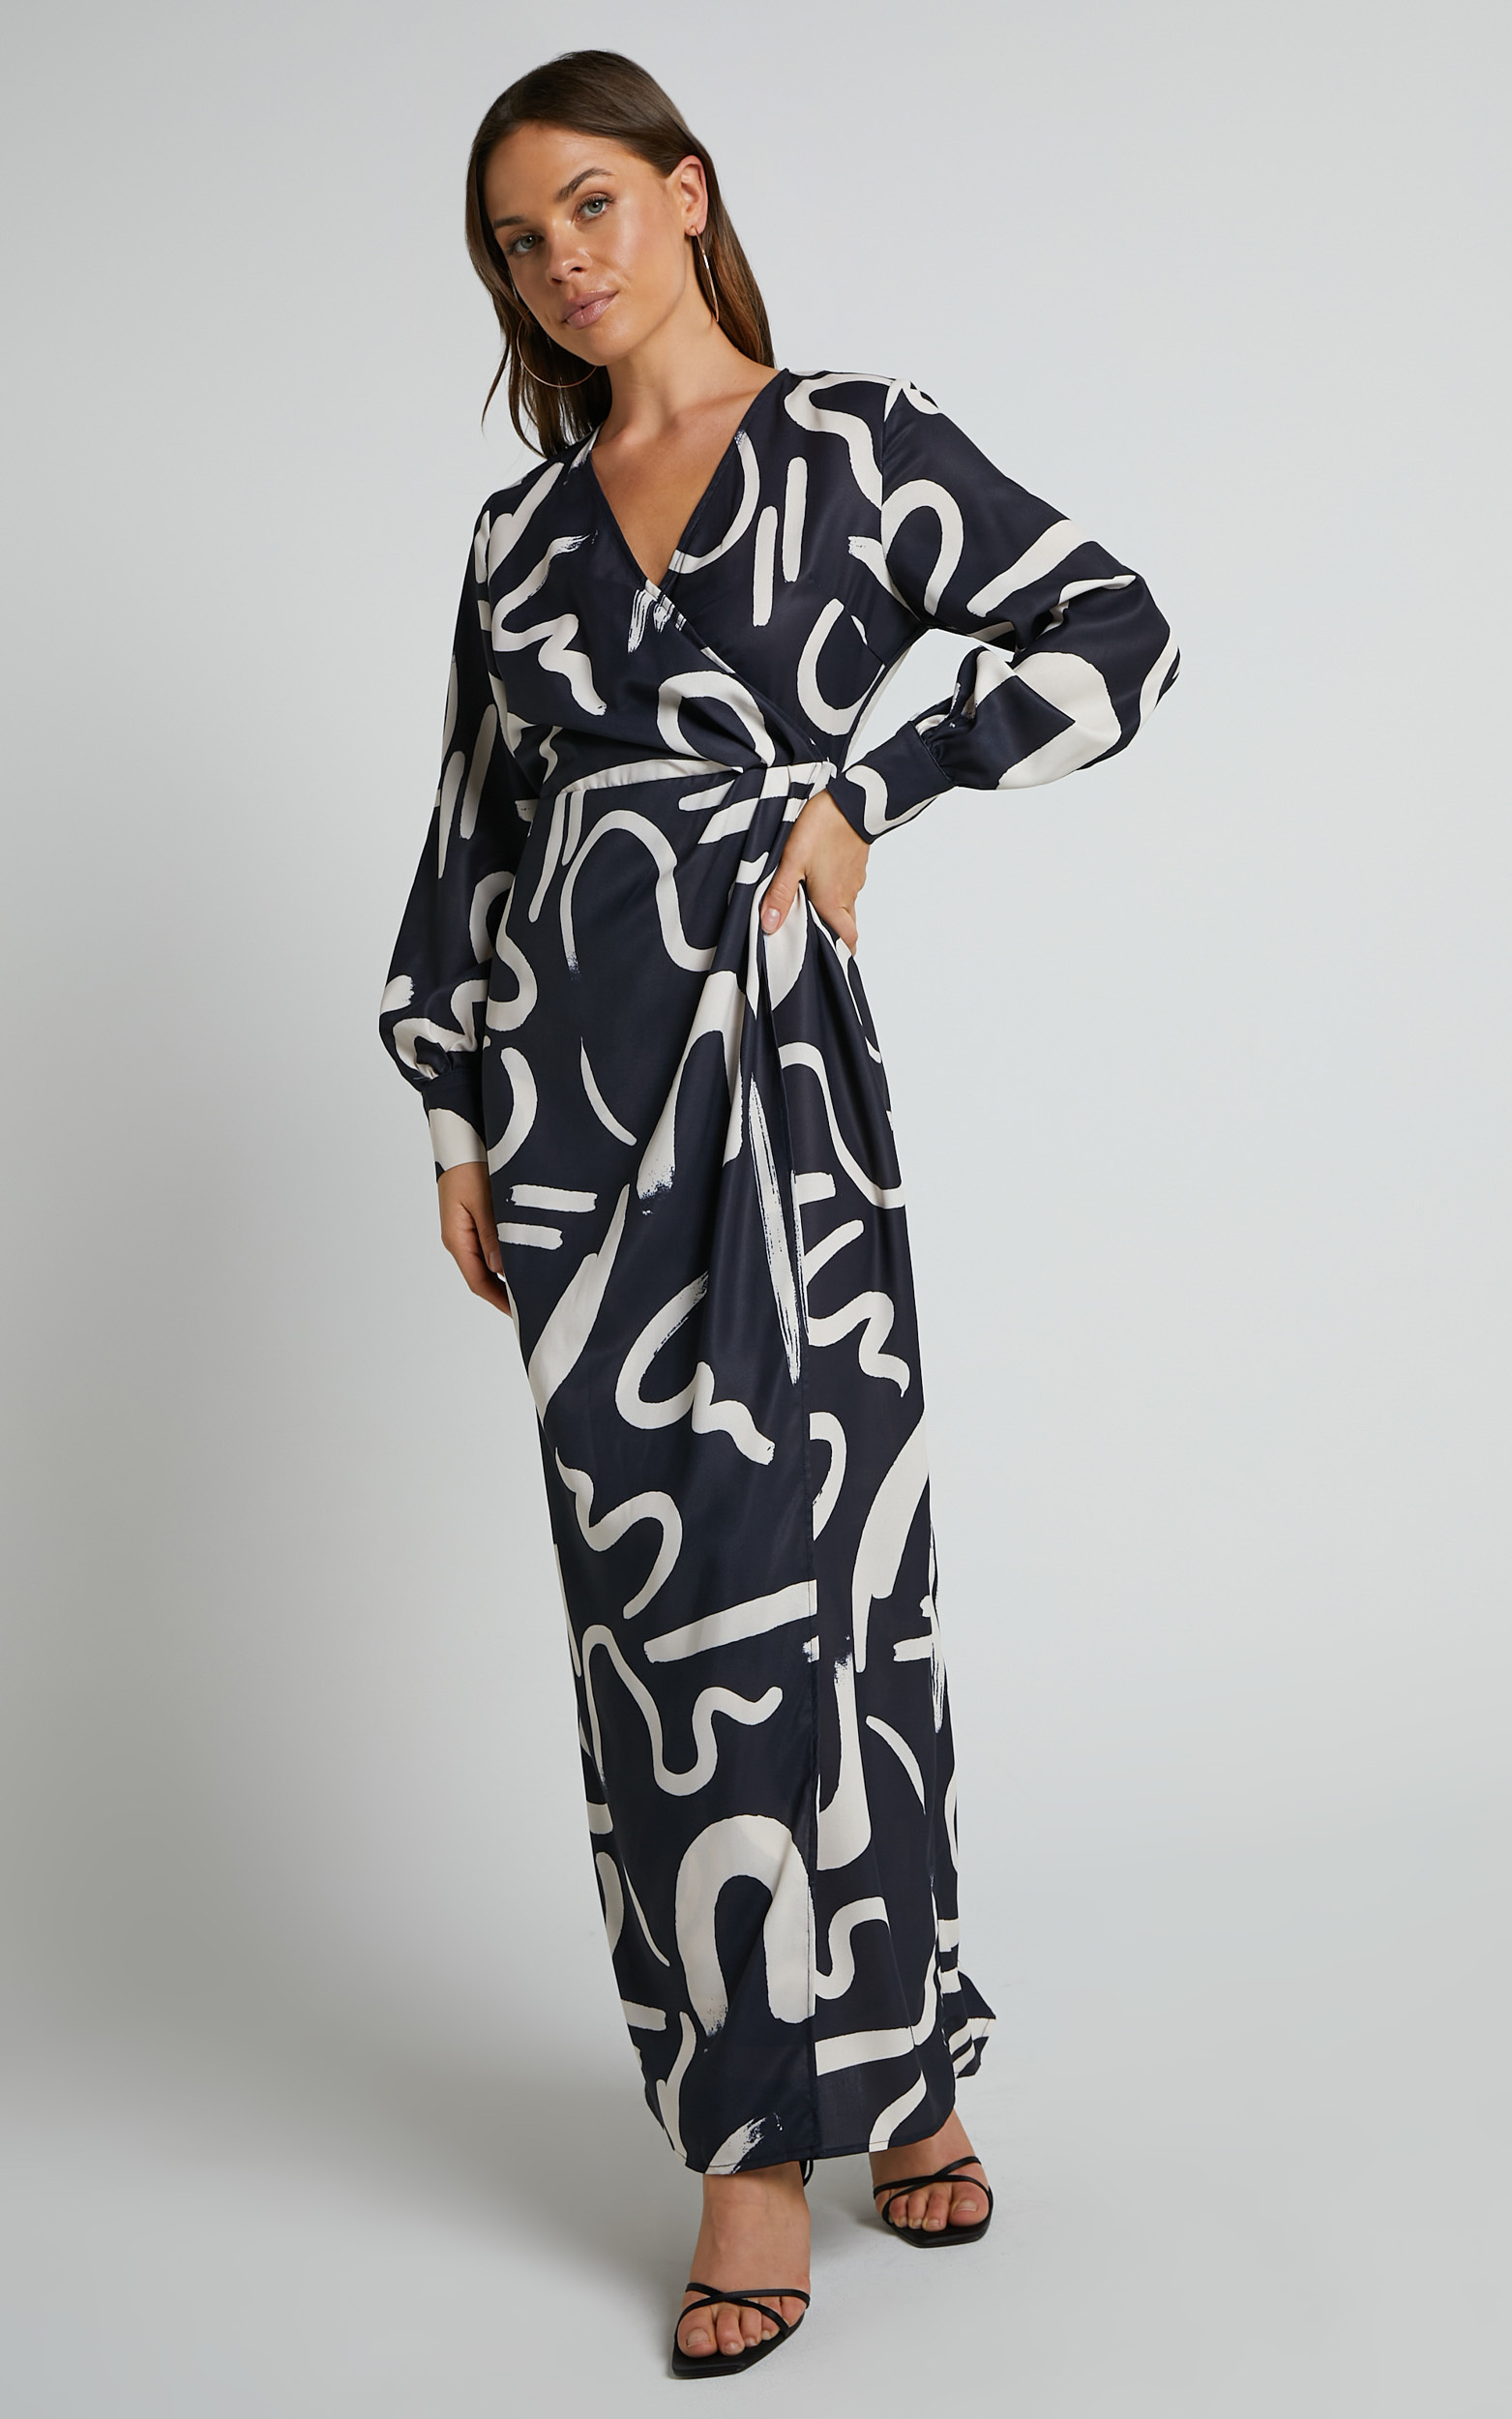 Leighton Long Sleeve Wrap Abstract Maxi Dress in Black - 06, BLK1, hi-res image number null